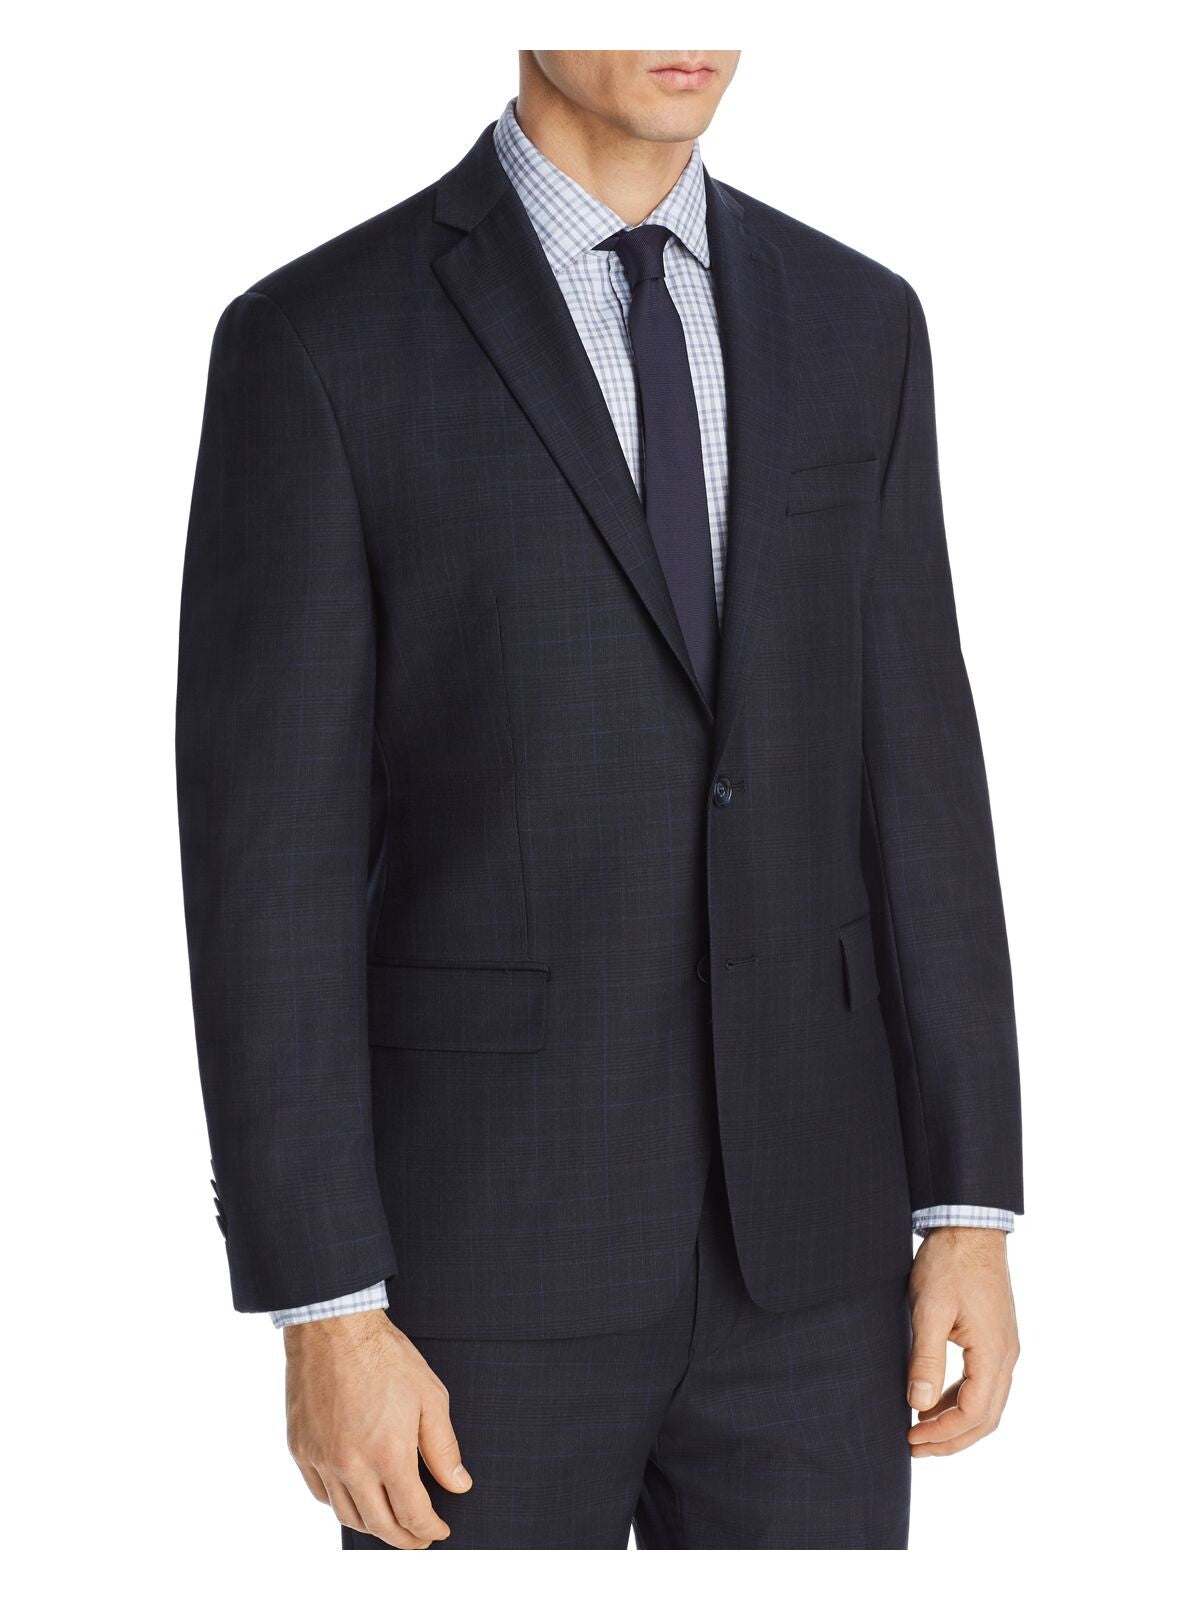 MICHAEL KORS Mens Navy Single Breasted, Windowpane Plaid Classic Fit Suit Separate Blazer Jacket 40L